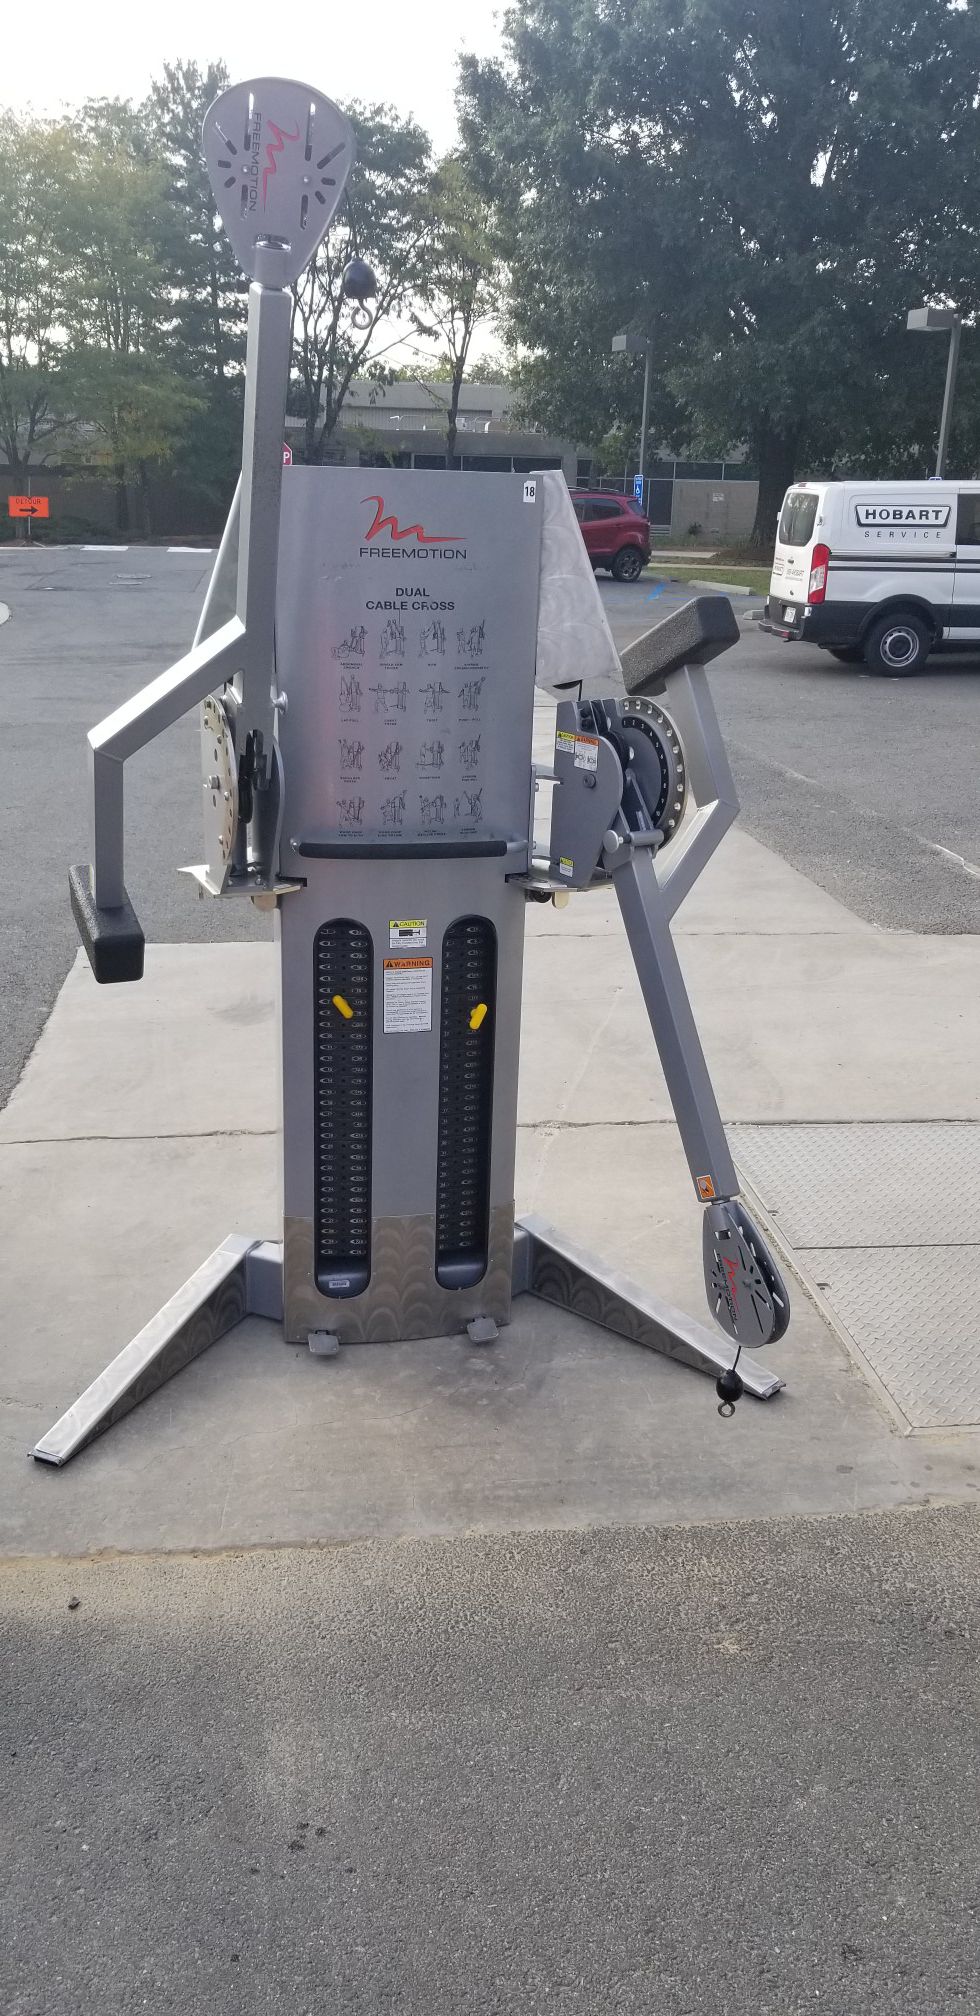 FreeMotion Functional Trainer